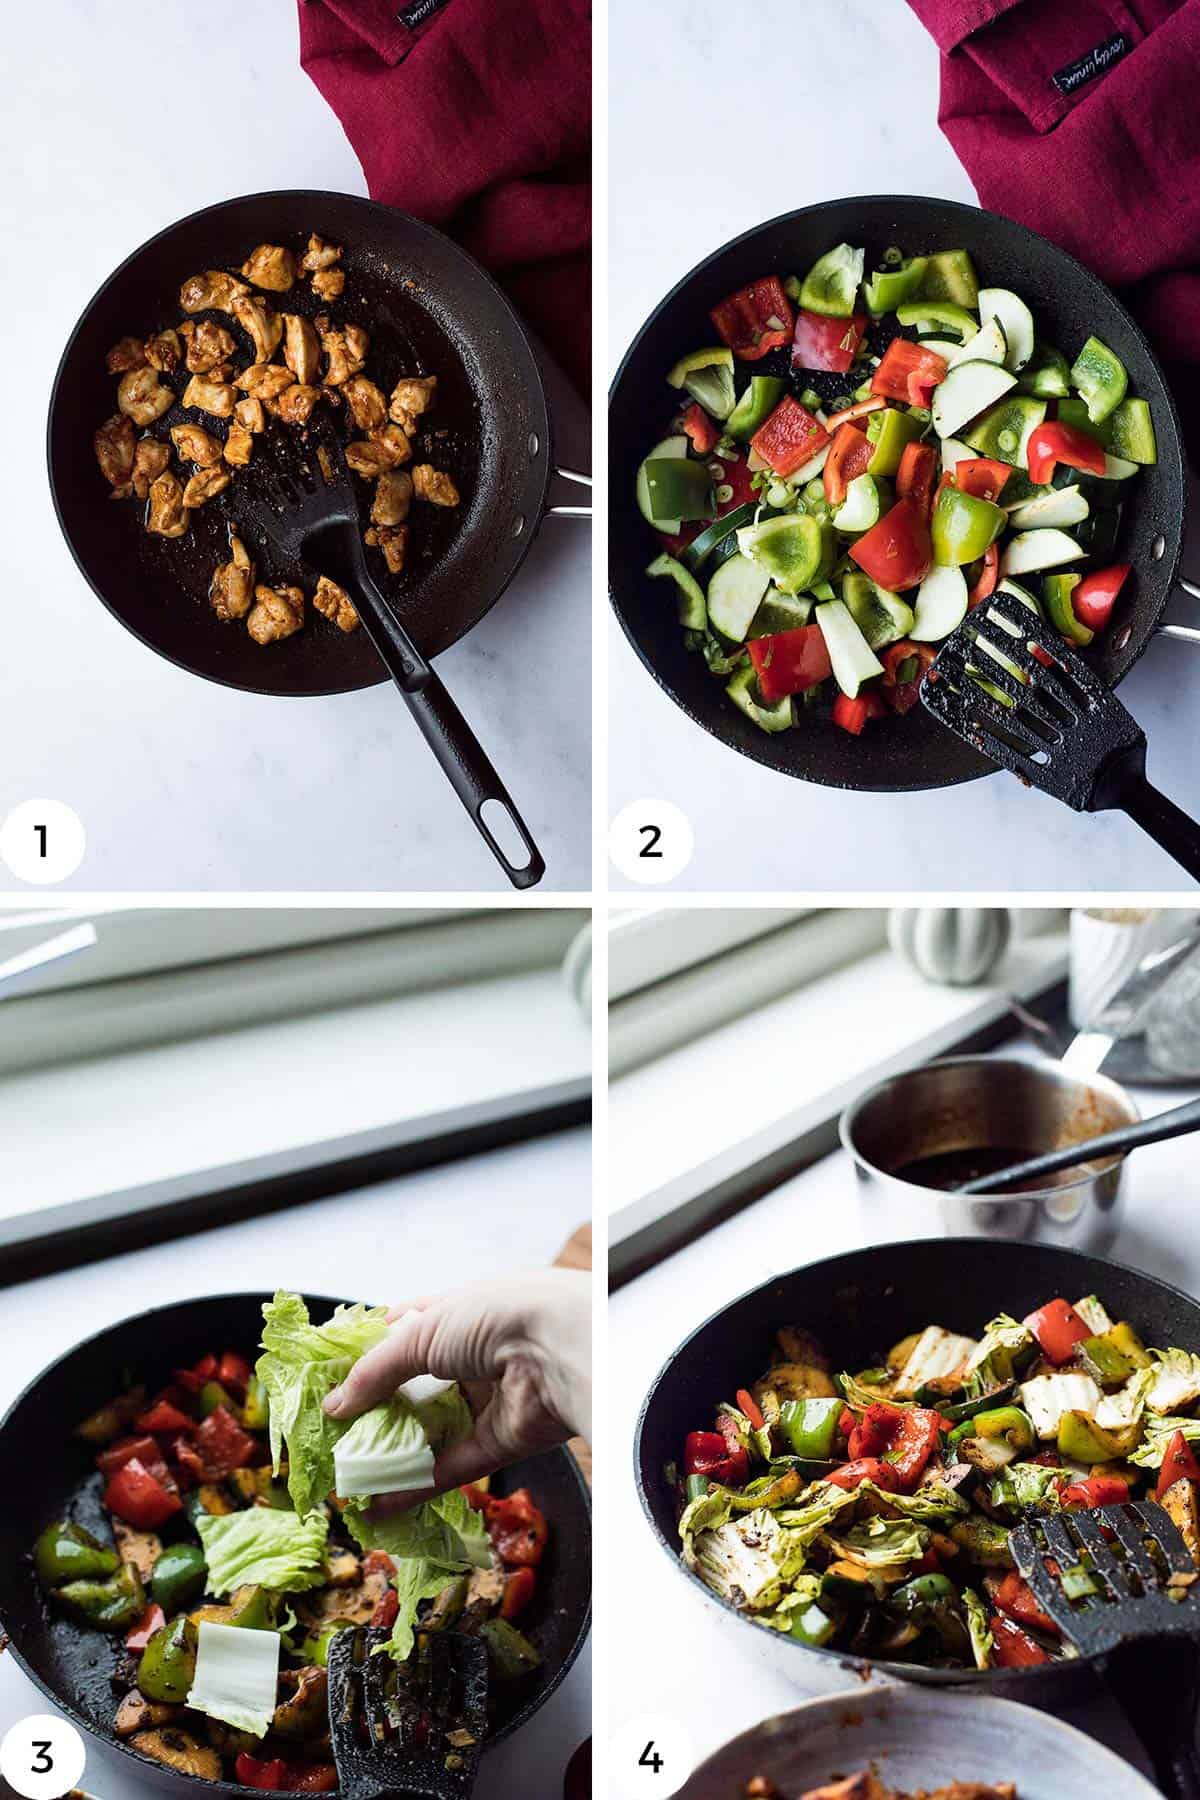 Steps to make the chicken and vegetables.